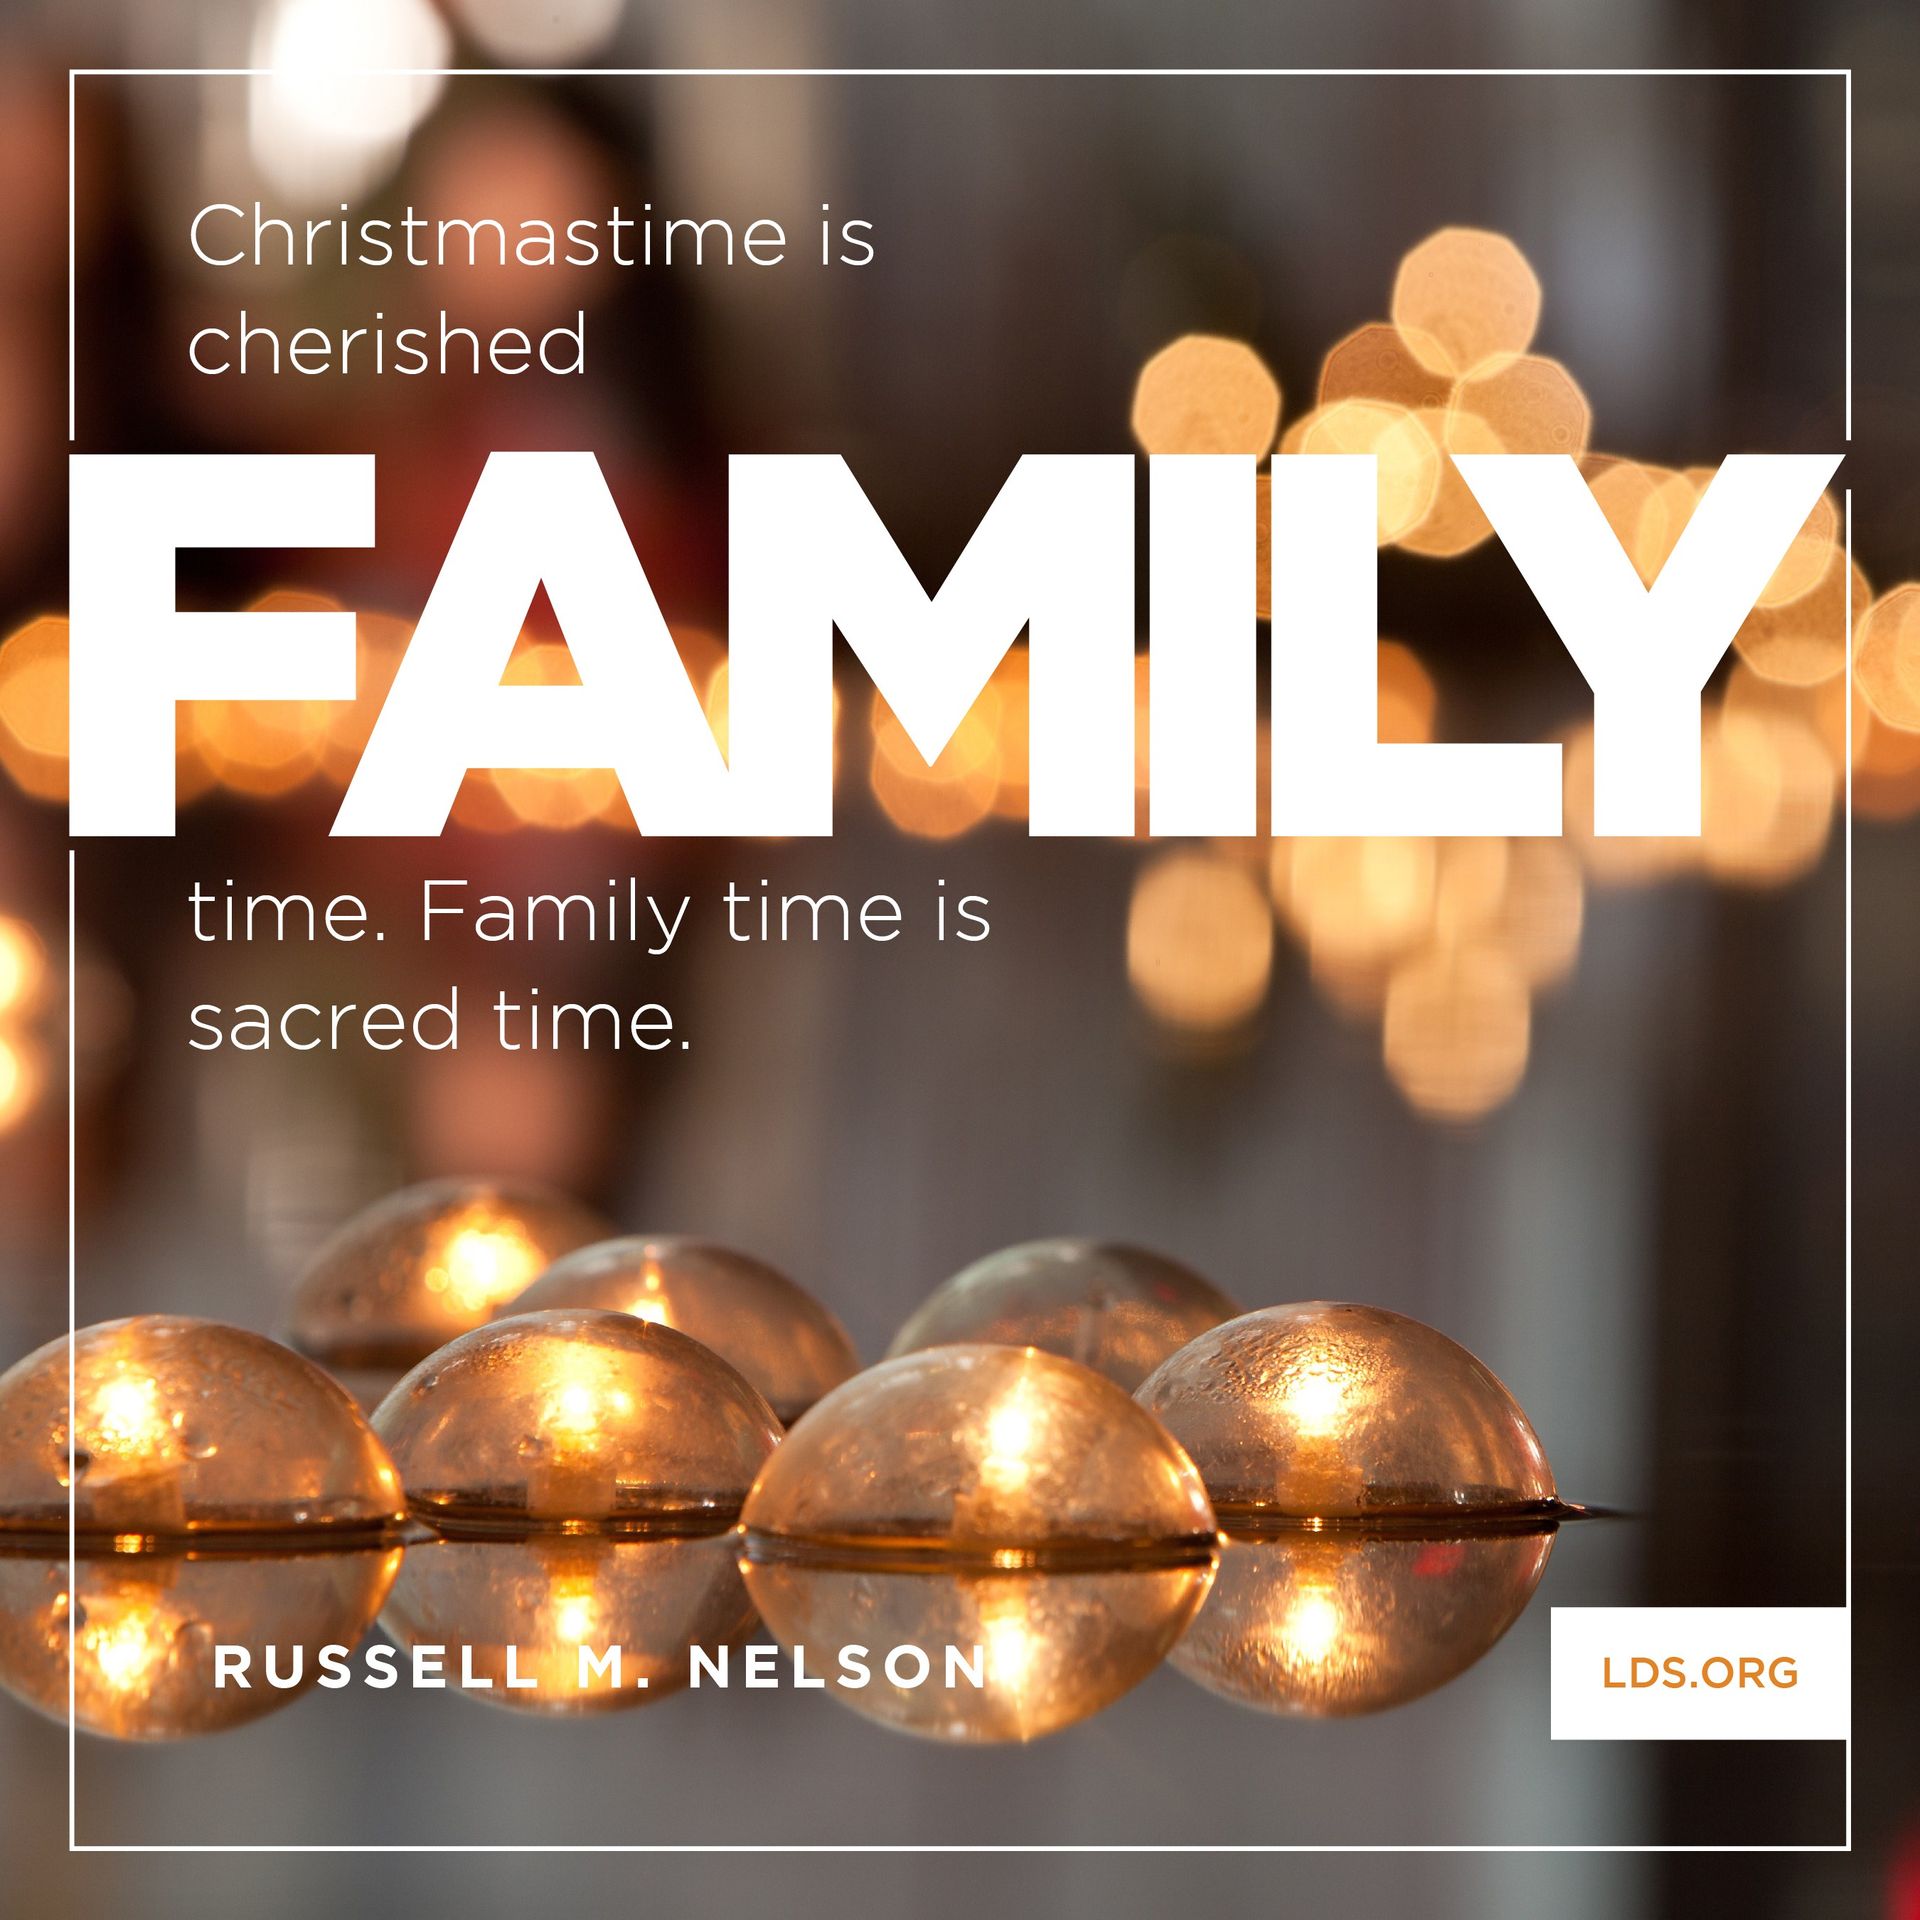 “Christmastime is cherished family time. Family time is sacred time.”—President Russell M. Nelson, “Jesus the Christ—Our Prince of Peace” © undefined ipCode 1.